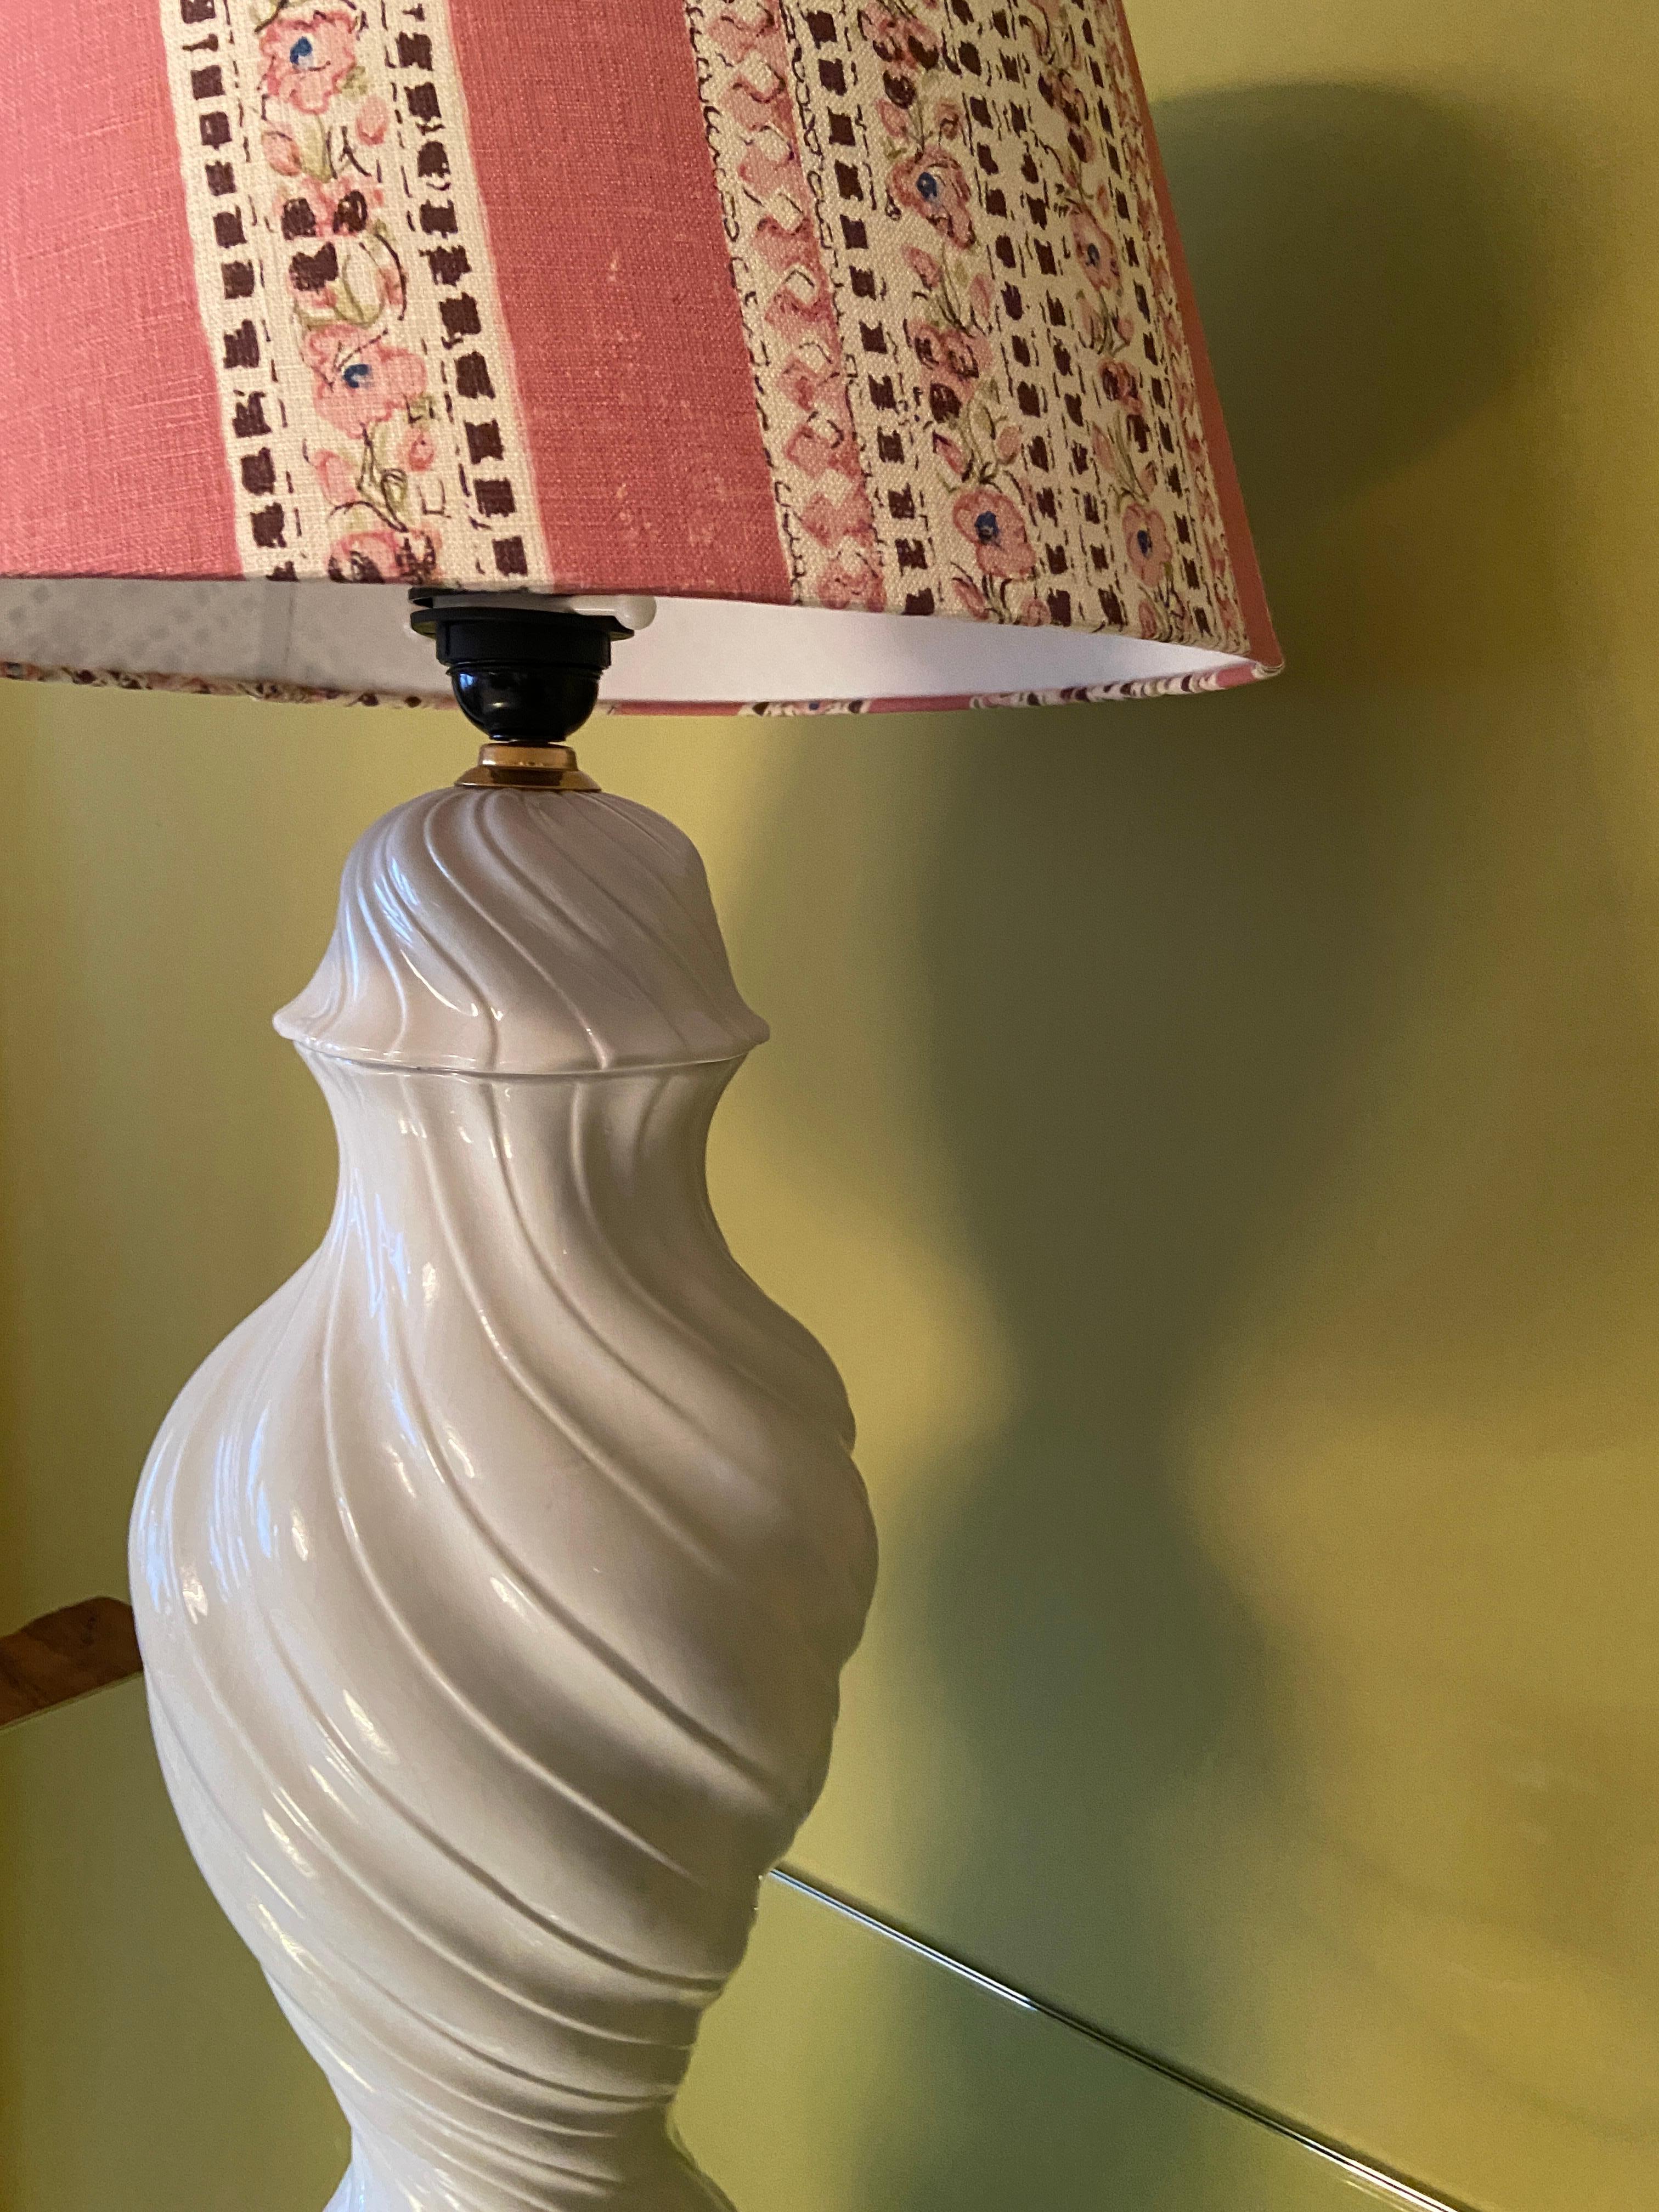 Vintage Ceramic Table Lamp with Customized Shade, Italy, 20th Century For Sale 4